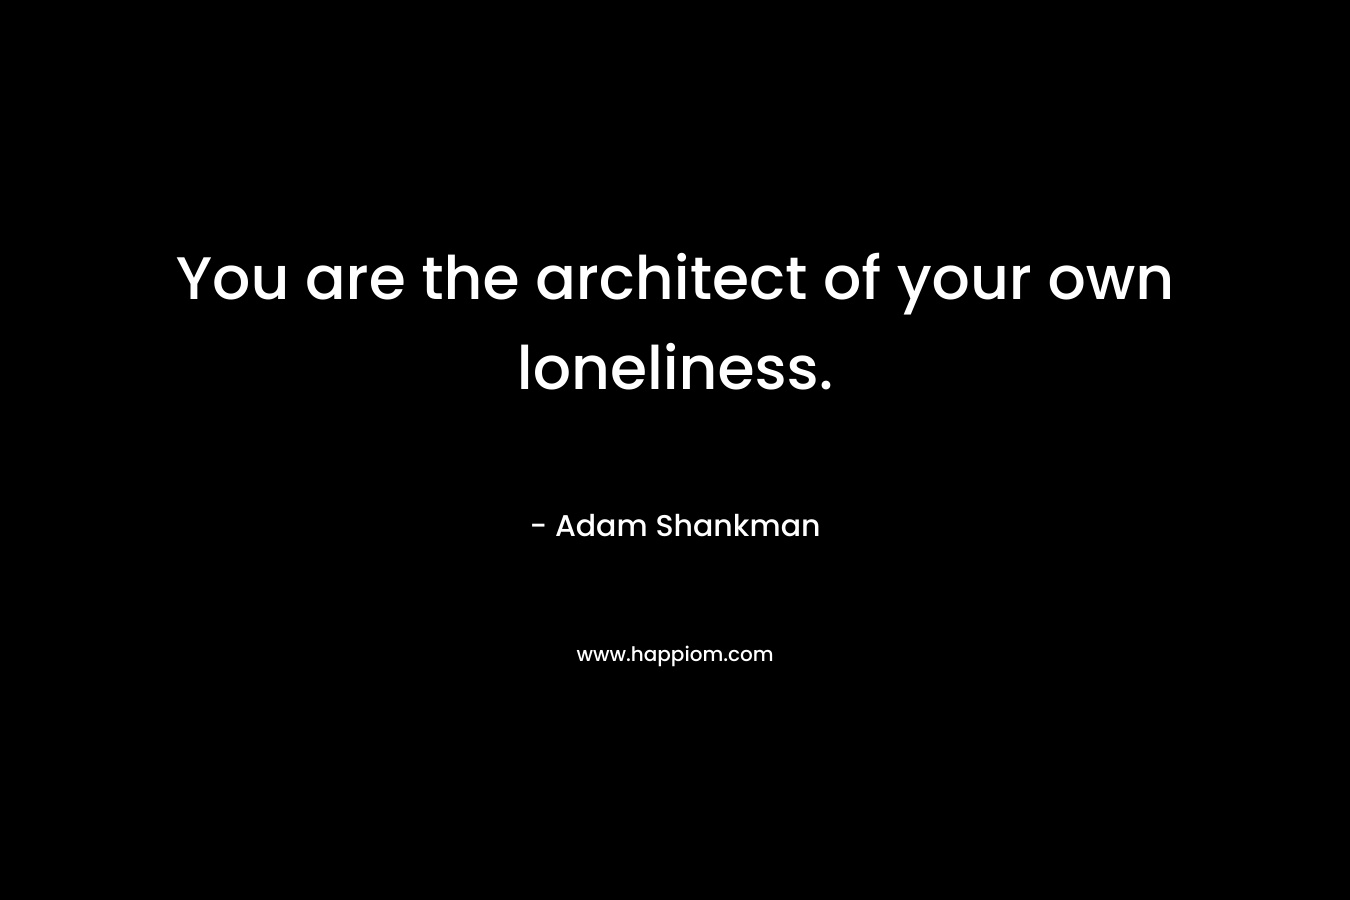 You are the architect of your own loneliness. – Adam Shankman